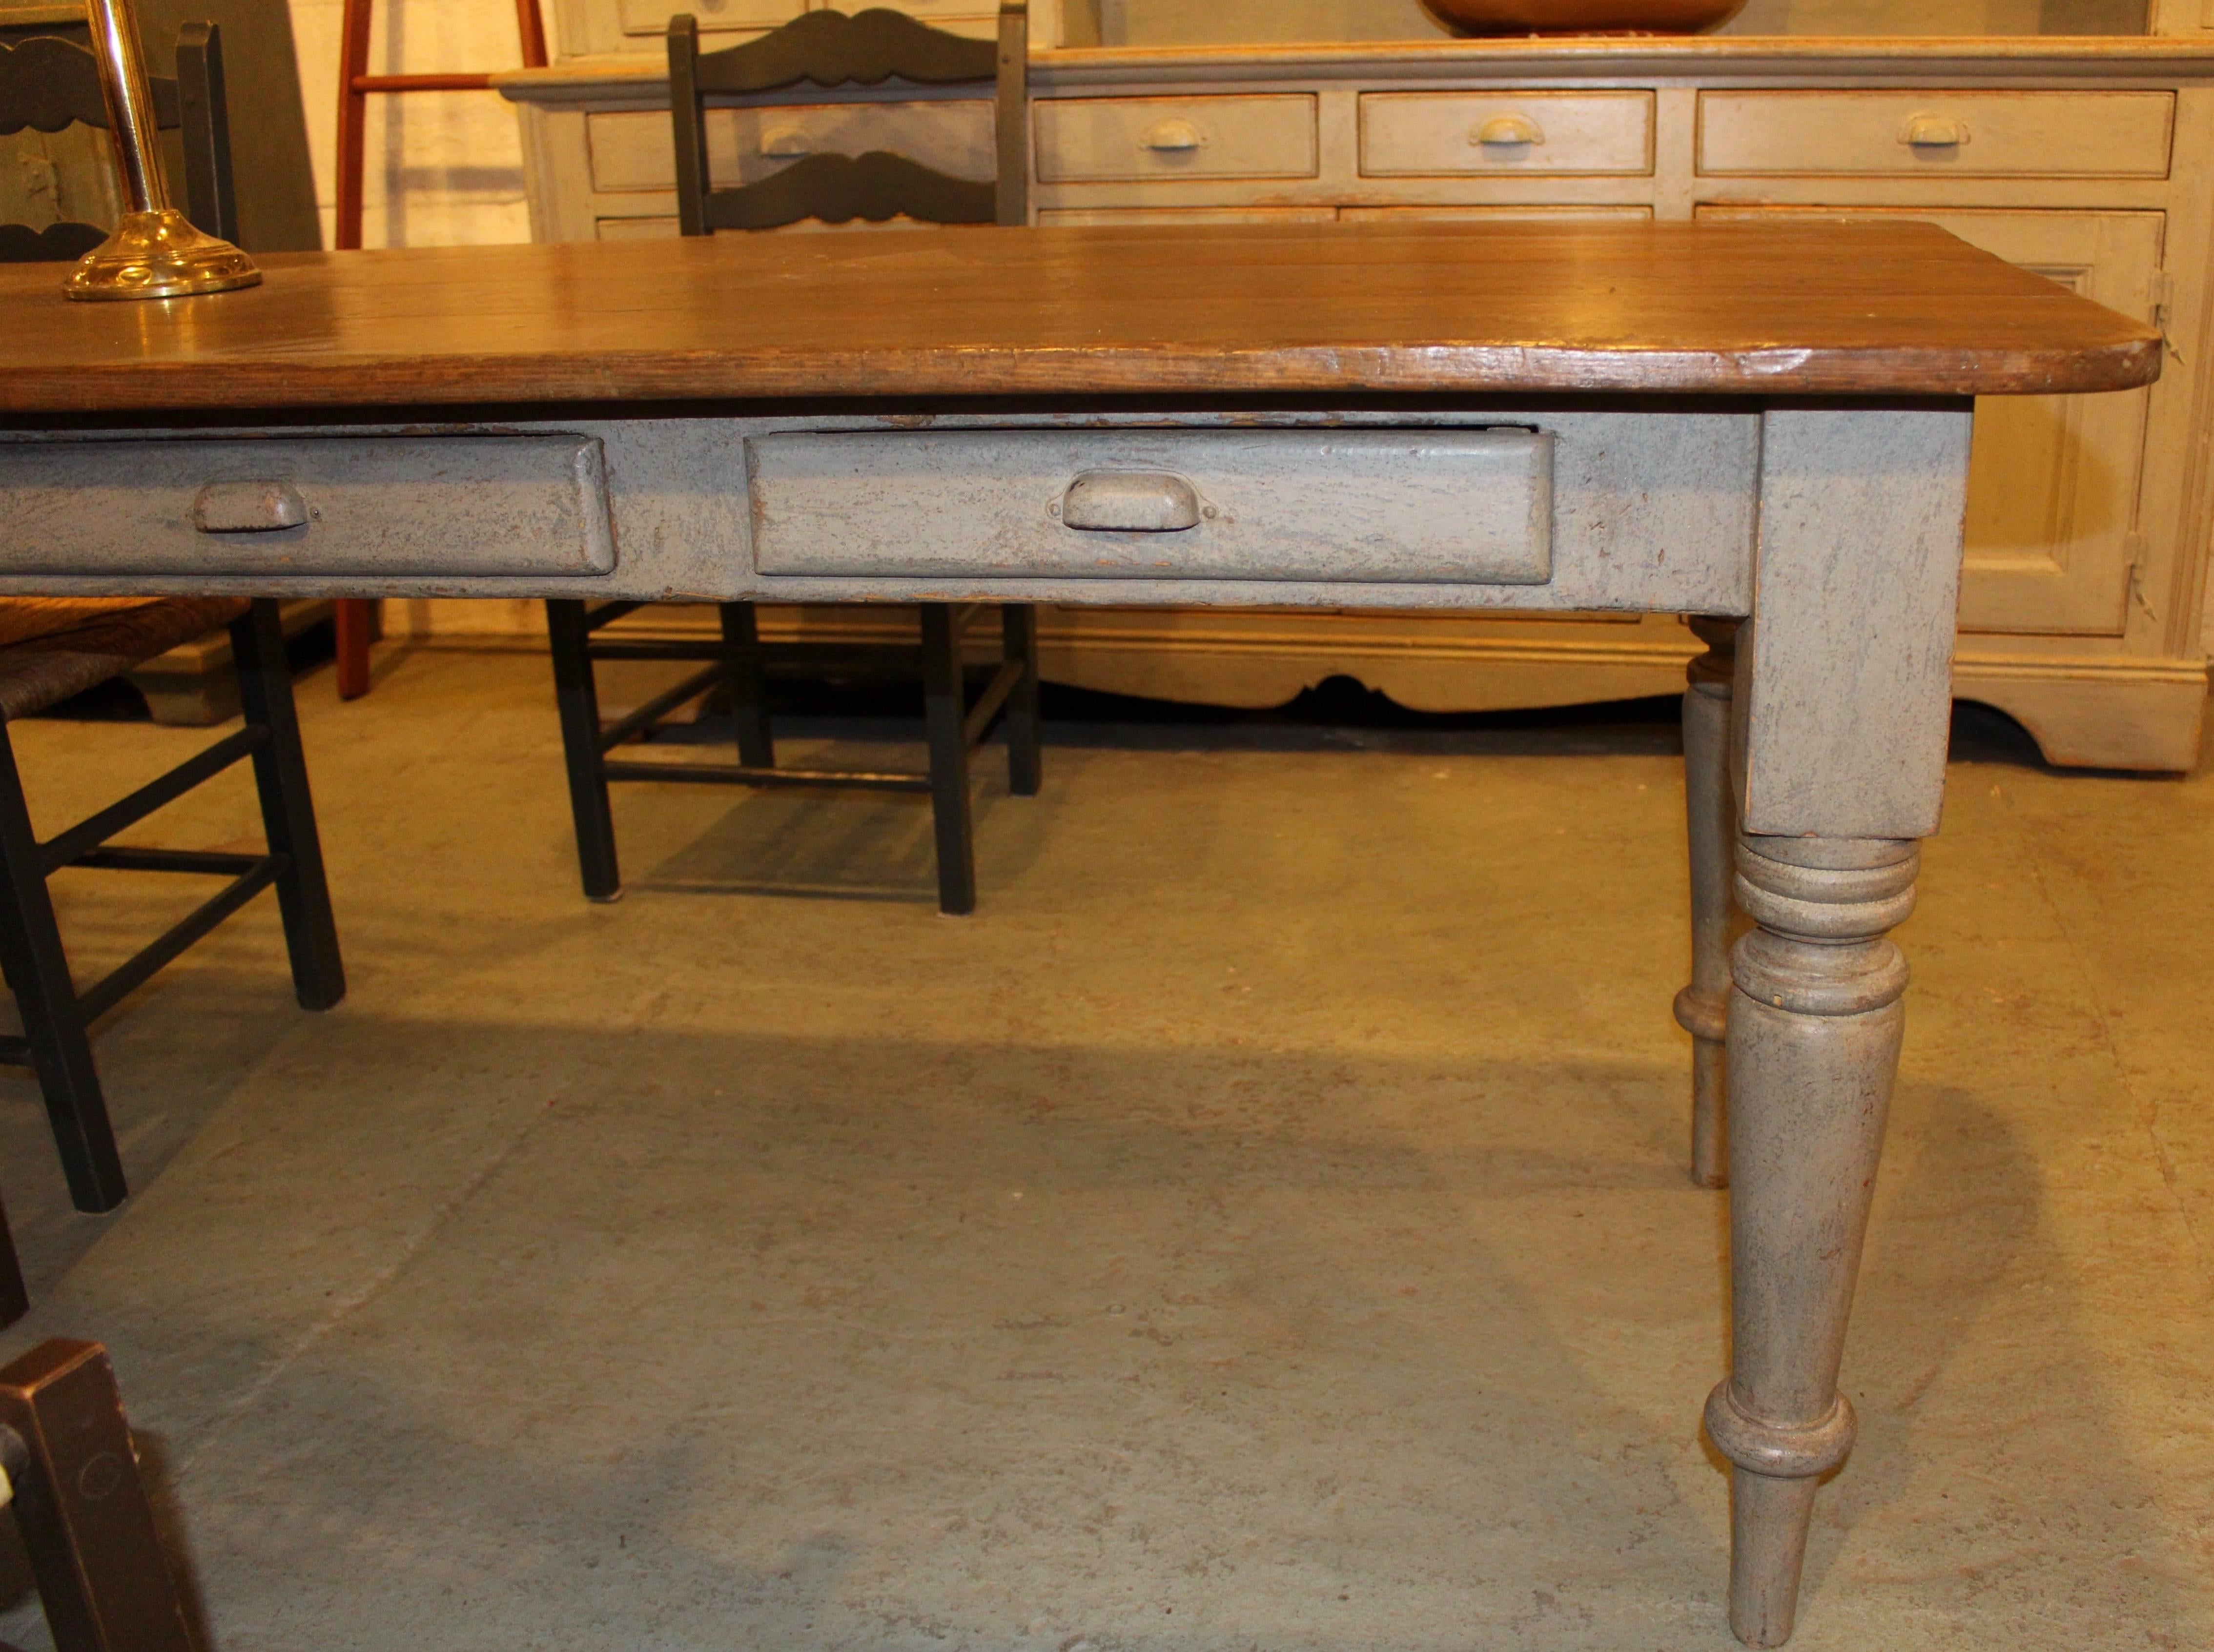 A 16-drawer table with center legs for extra support. 14.5 feet long.
Found in a convent.